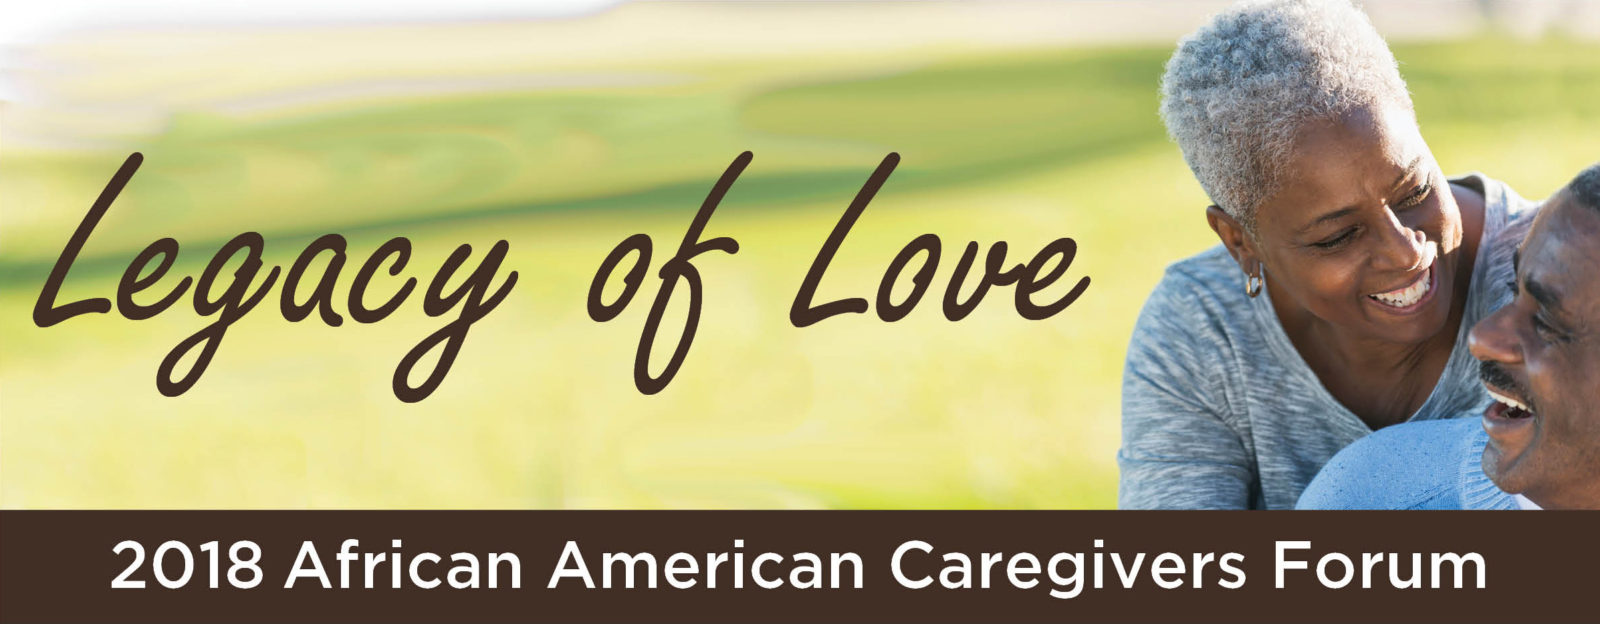 banner for Legacy of Love 2018 African American Caregivers Forum has photo of a black woman and black man with a green field in the distance